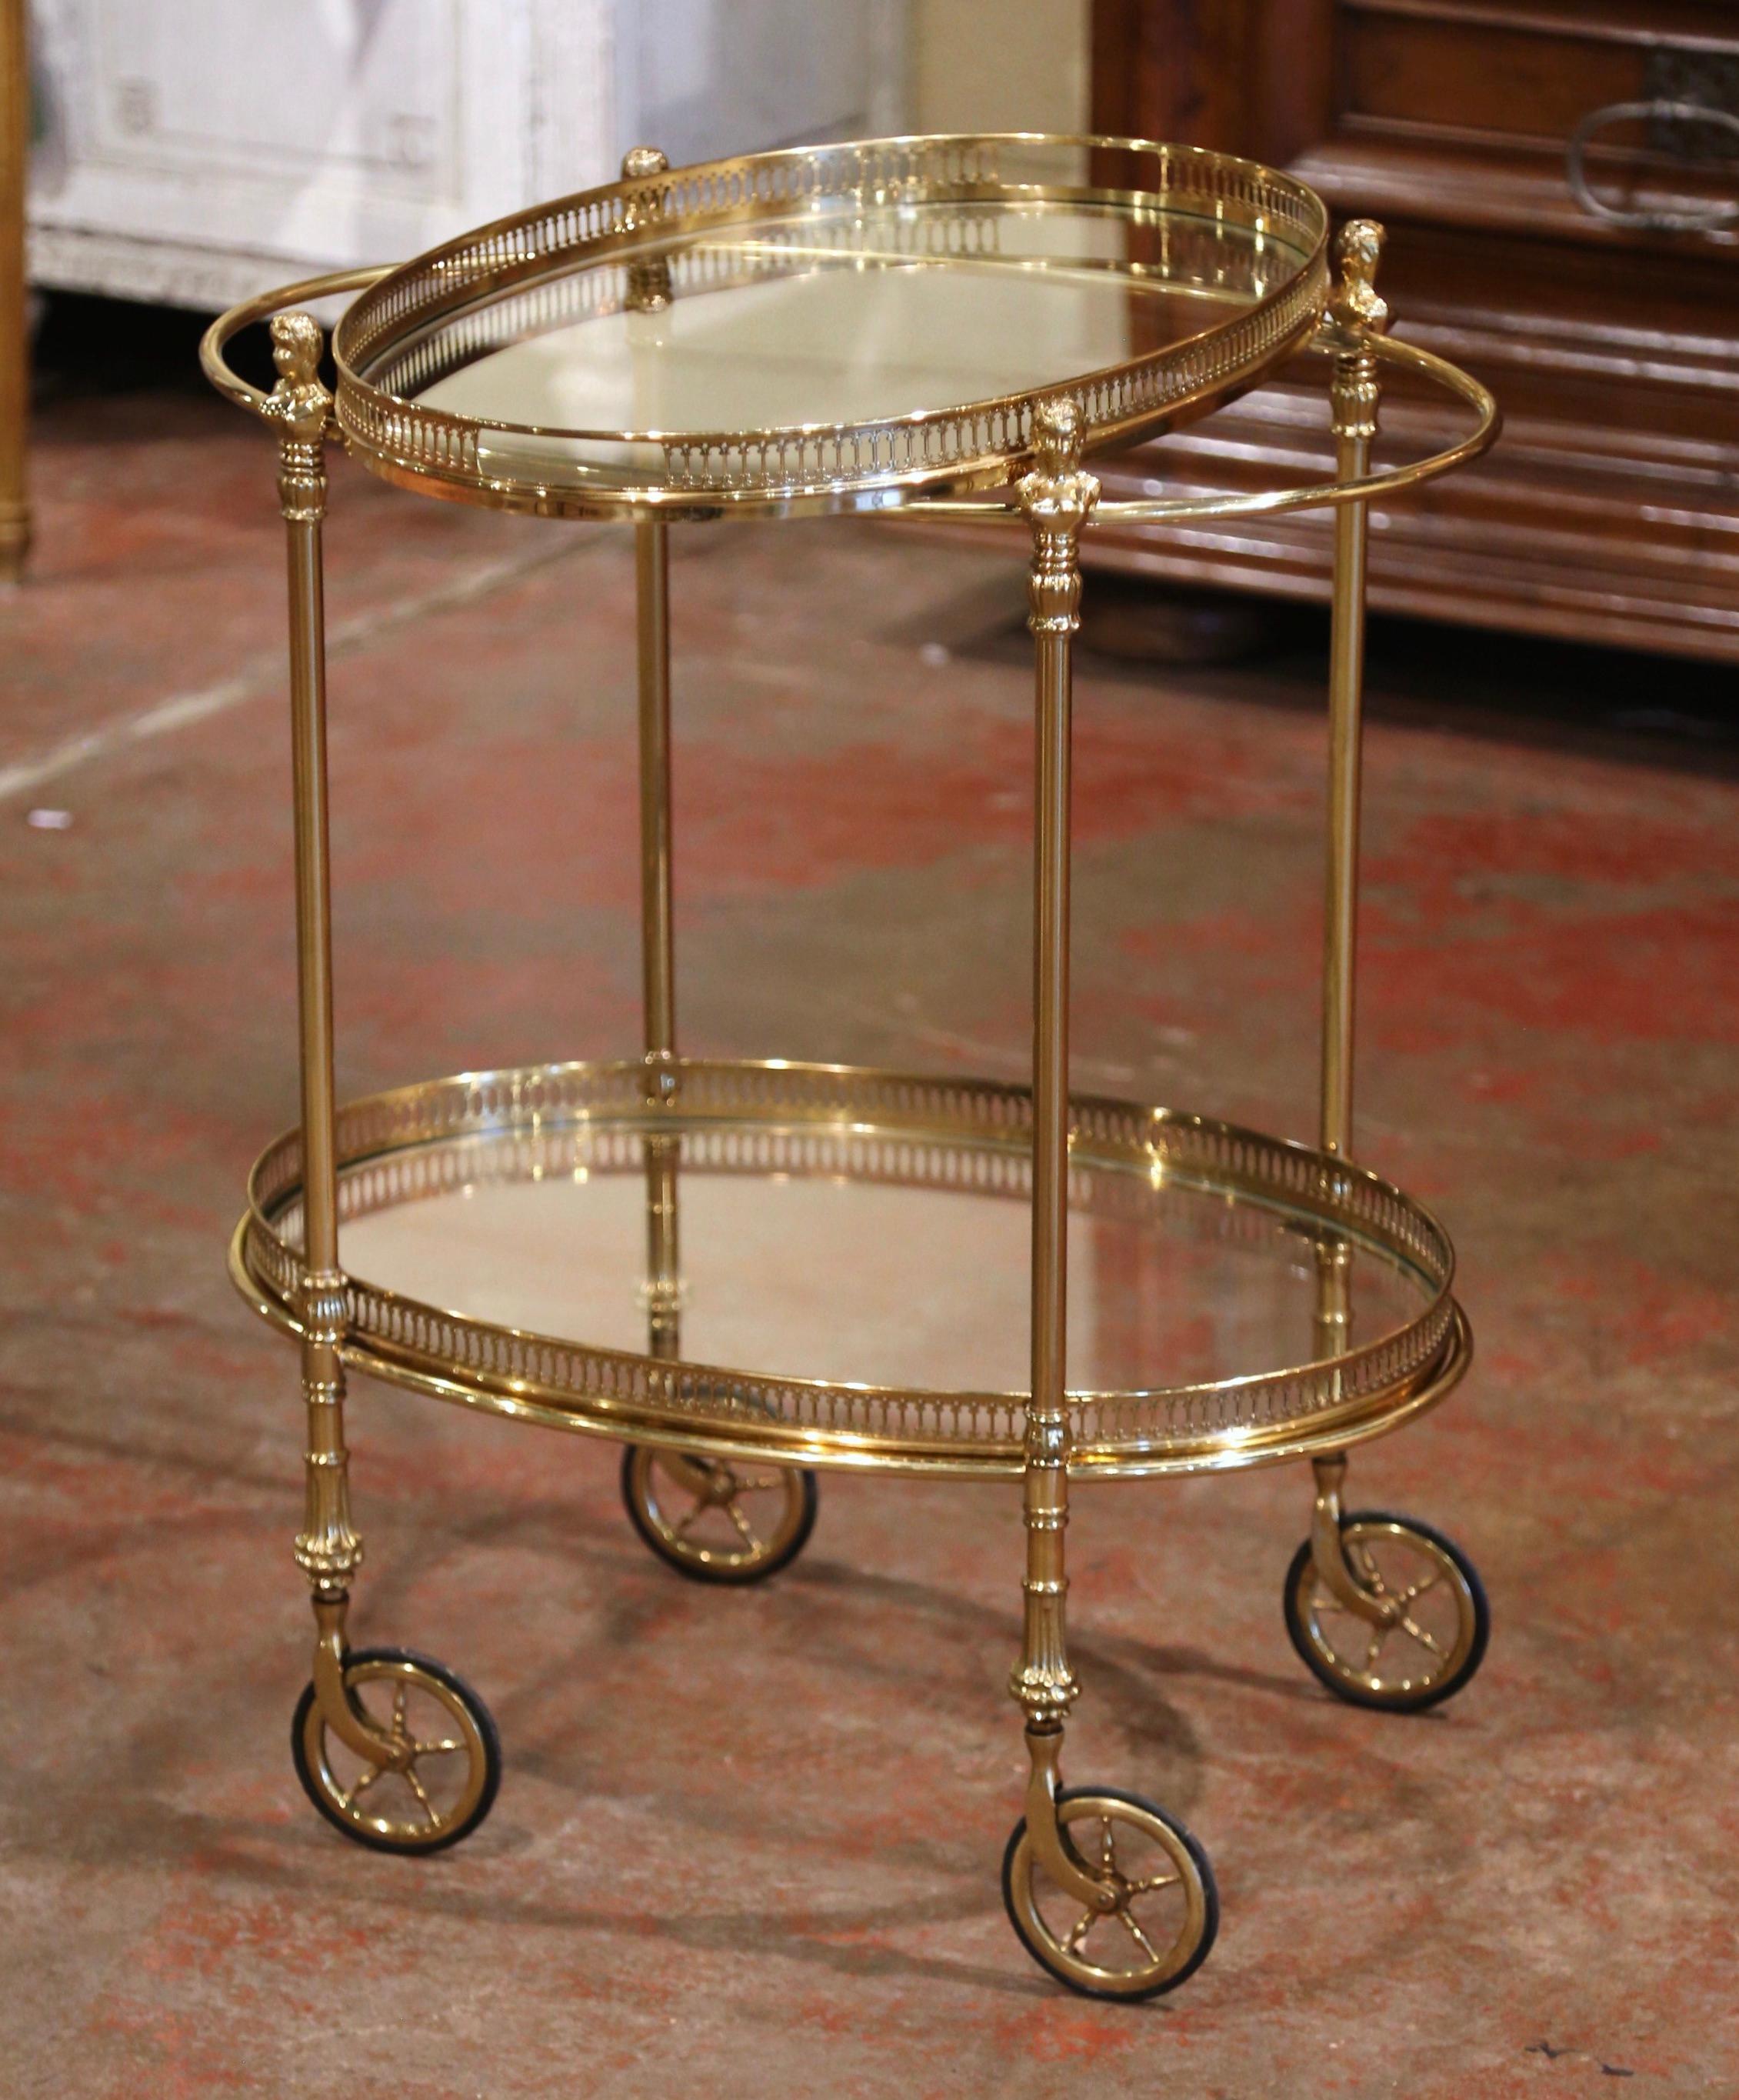 Midcentury French Polished Brass Dessert Table or Bar Cart on Rubber Wheels 1